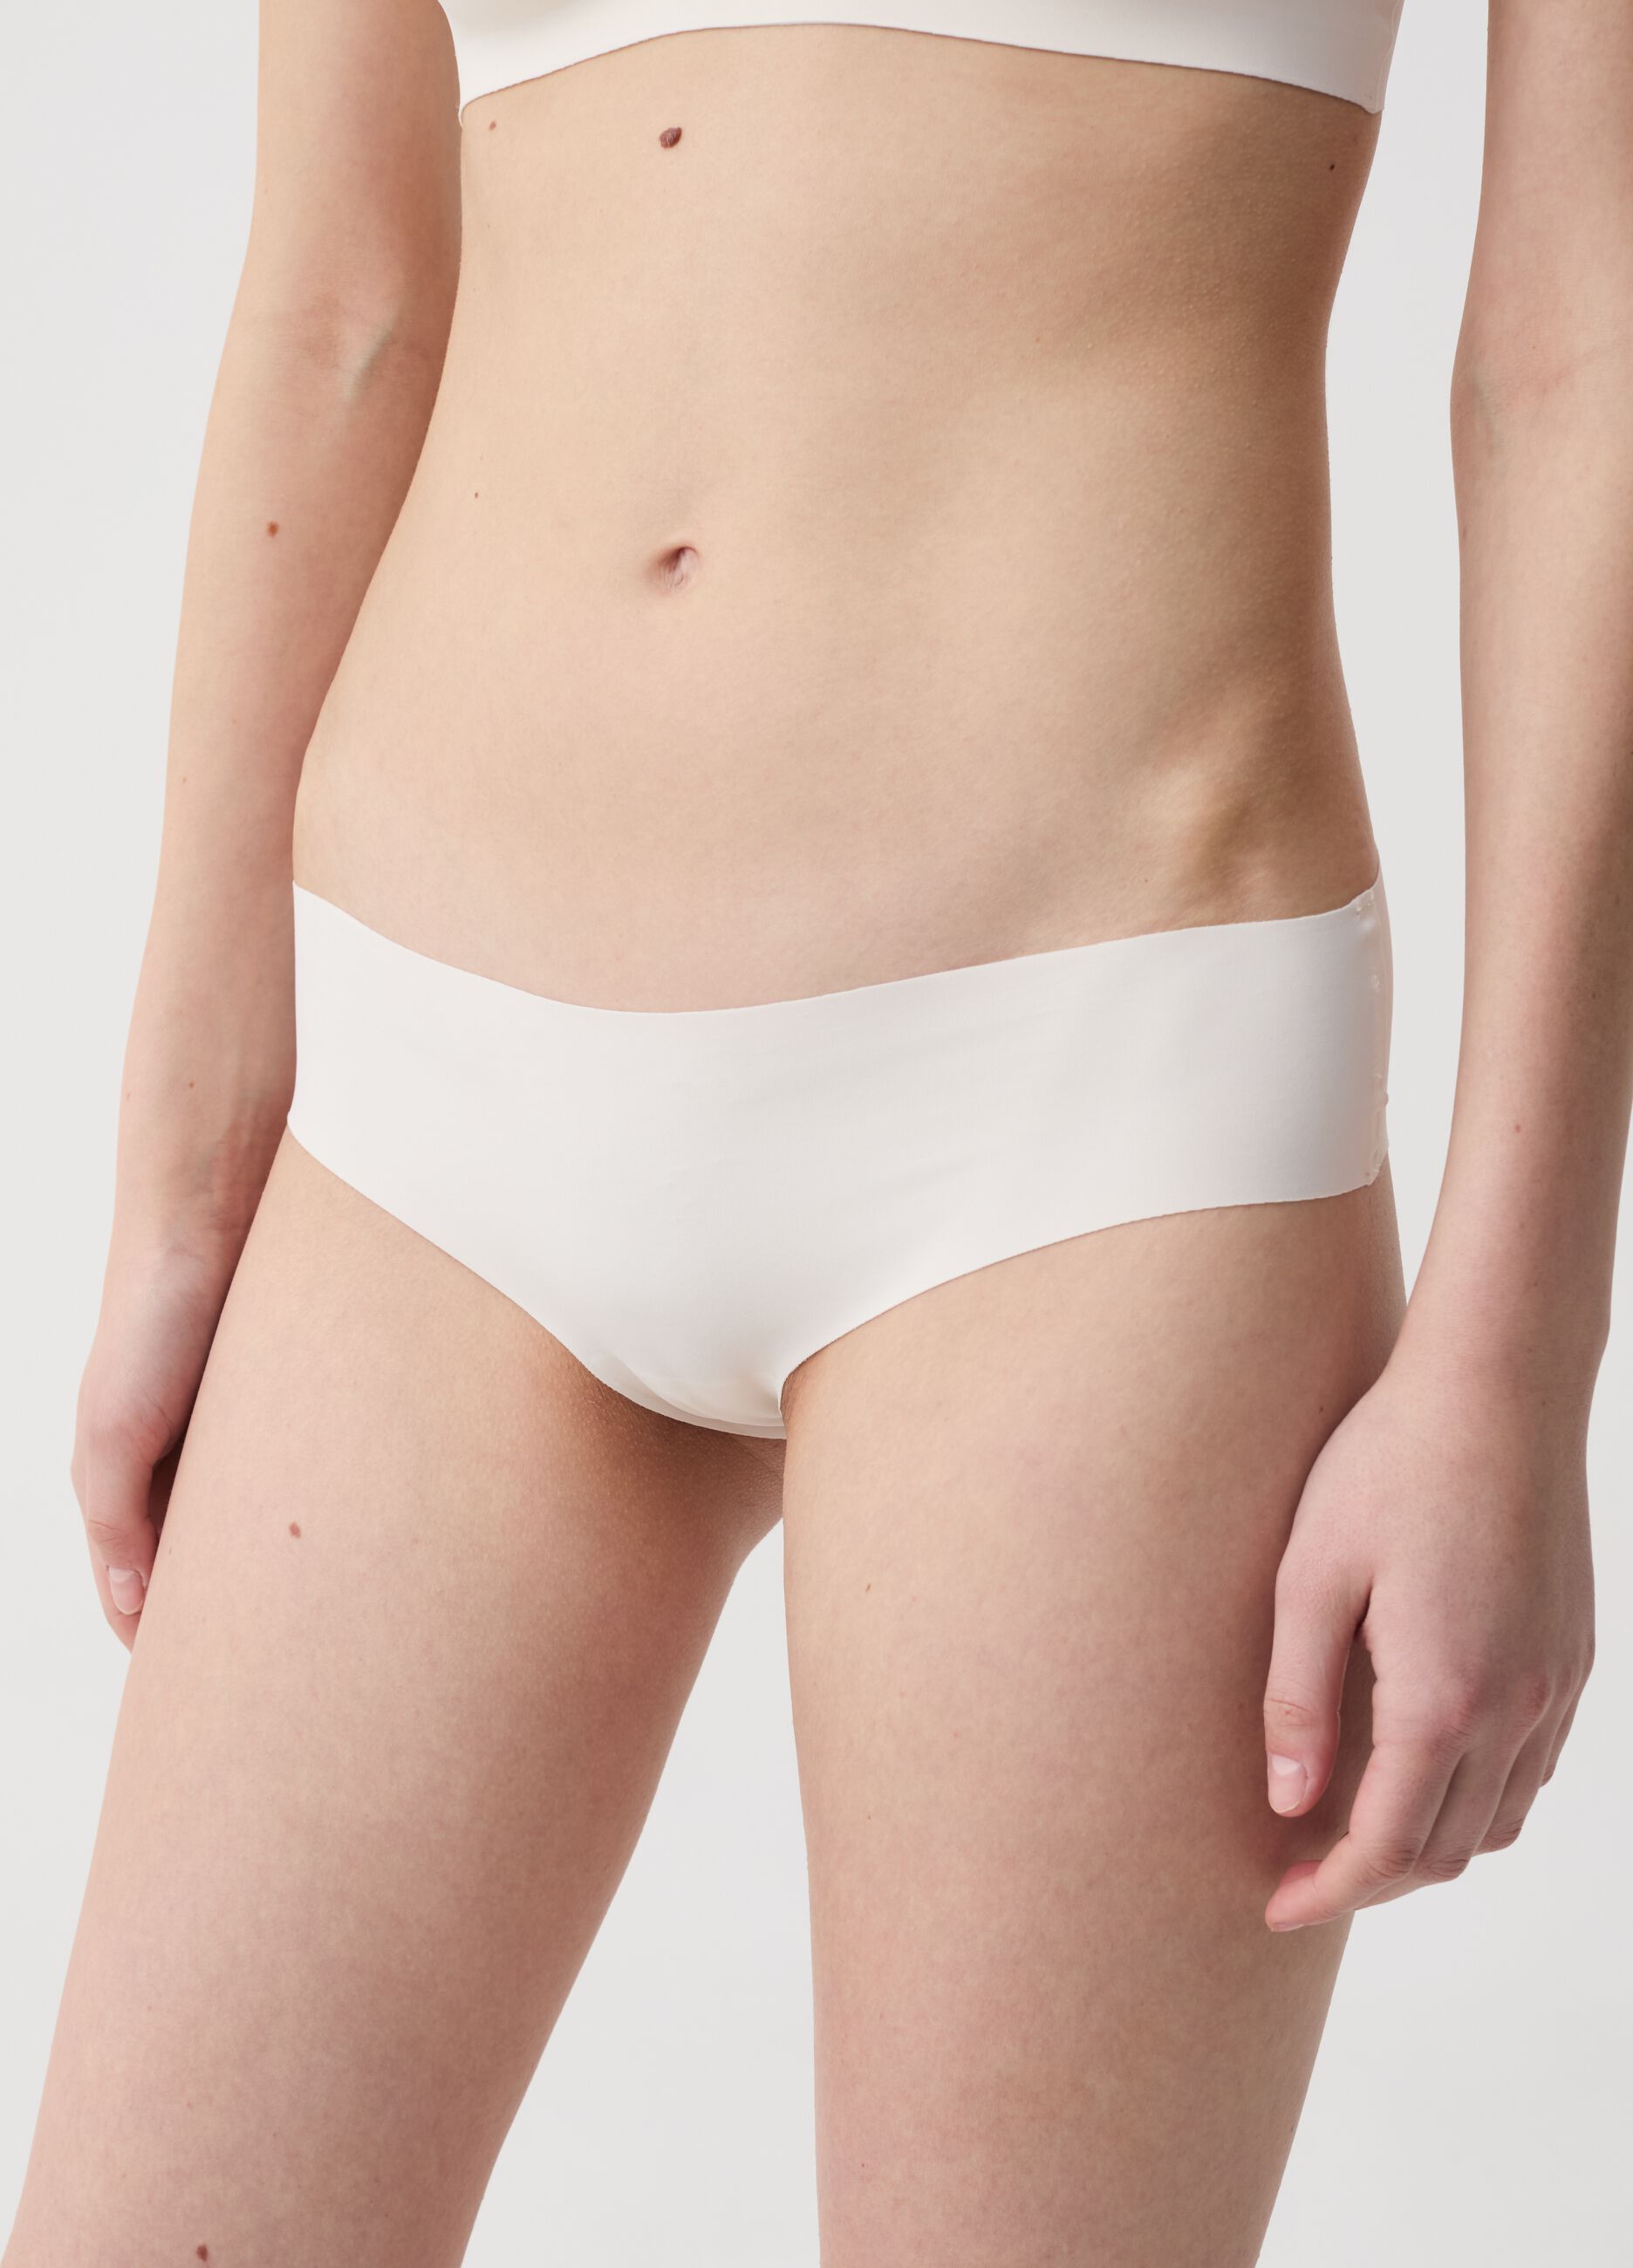 The Nude high-rise briefs